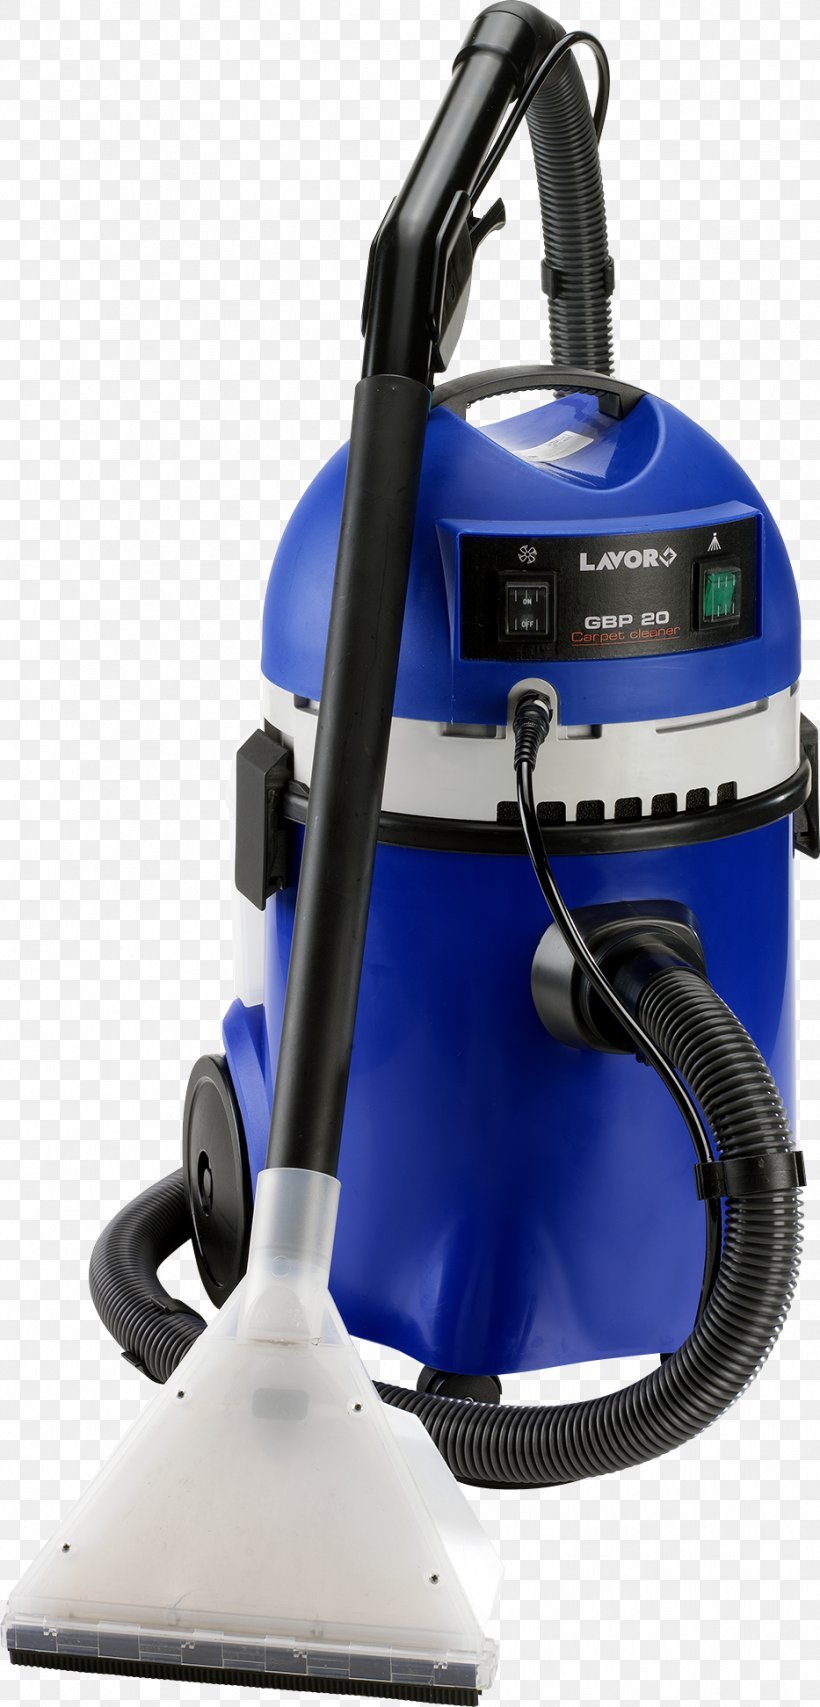 Vacuum Cleaner Pound Sterling Carpet Cleaning Price, PNG, 933x1943px, Vacuum Cleaner, Avito, Carpet, Carpet Cleaning, Cleaner Download Free